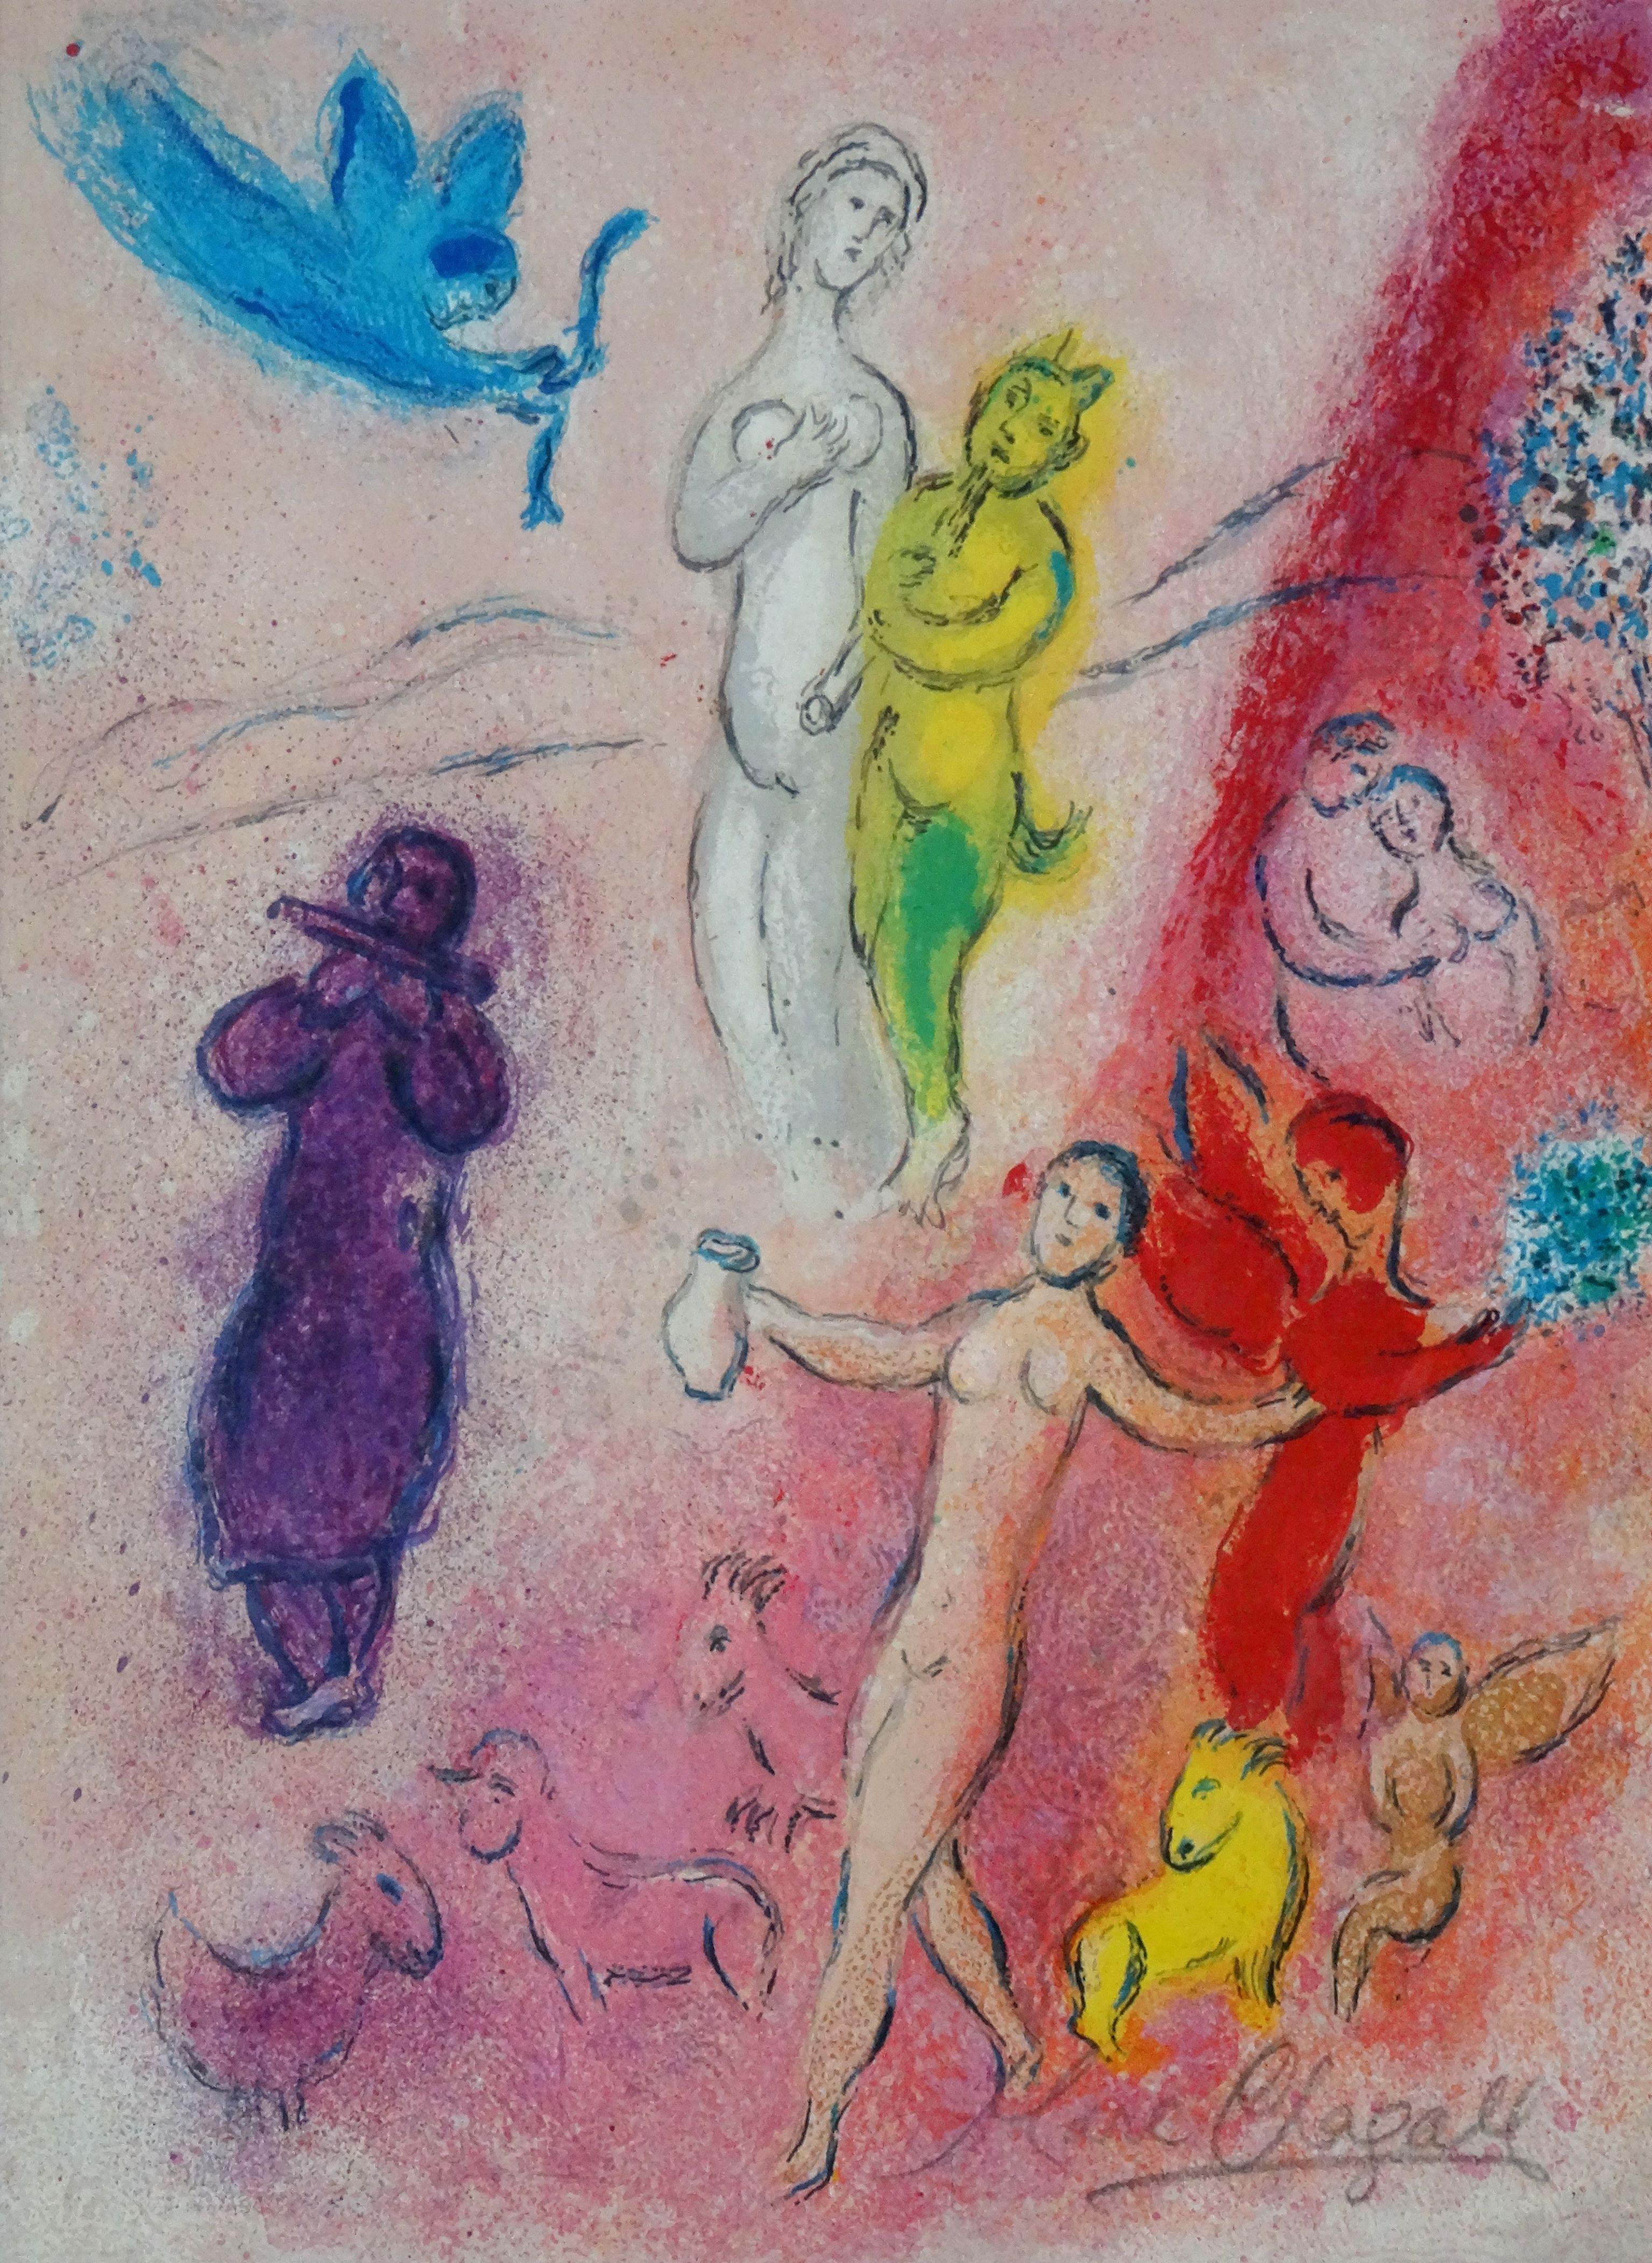 Marc Chagall Figurative Print - Daphnis and Chloe Suite. 1977, lithography, 33x25 cm 